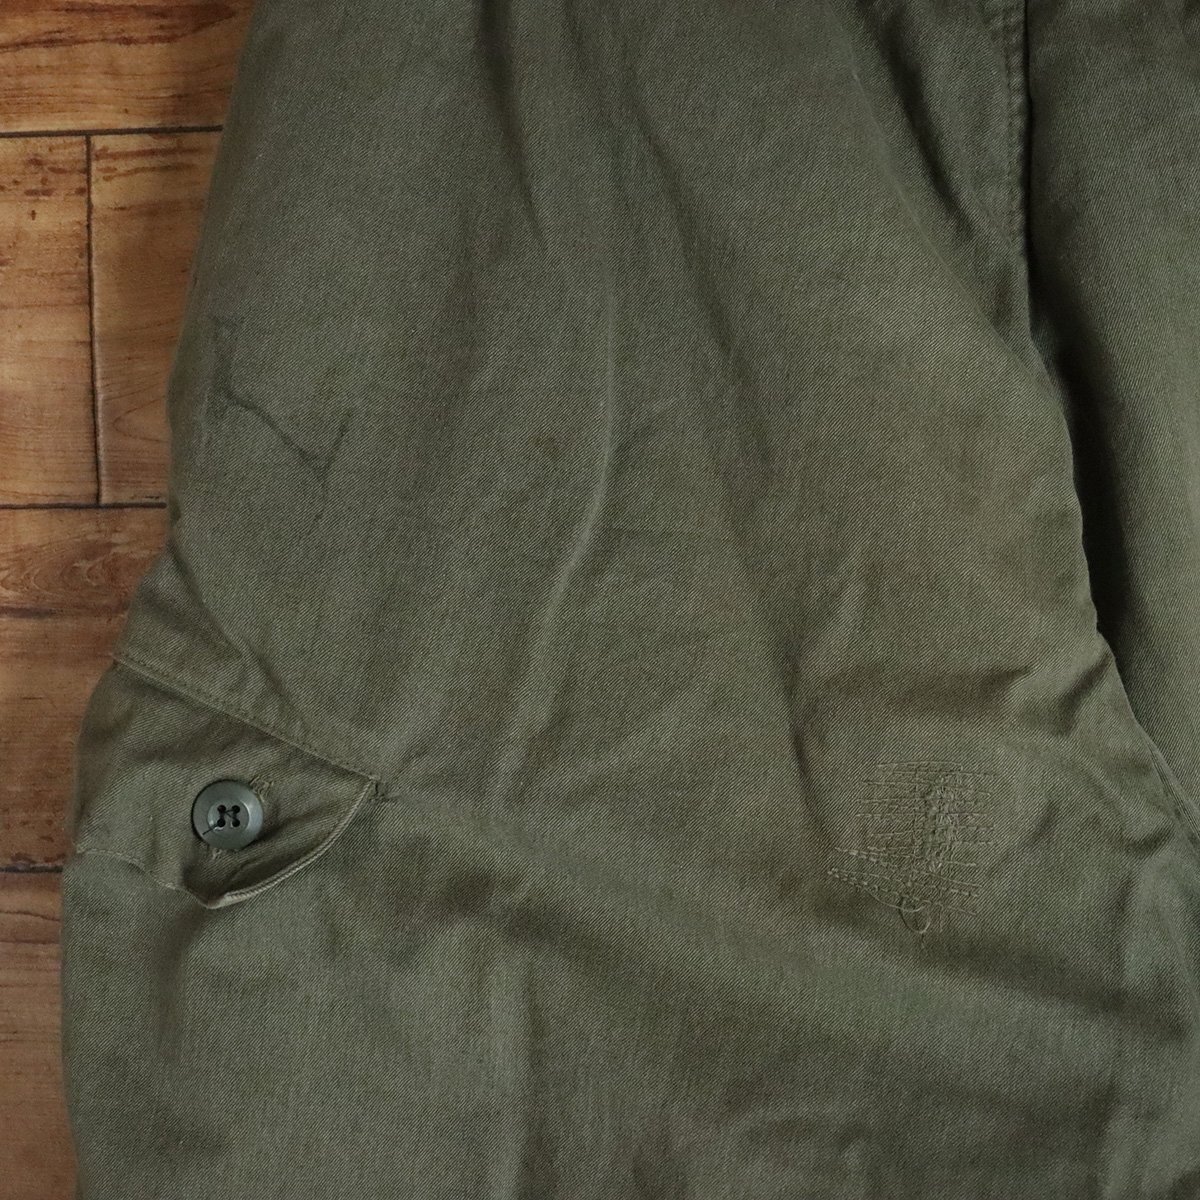 G9S/R3.20-1 Germany army cold weather pants with cotton cargo pants field pants german military euro Vintage 